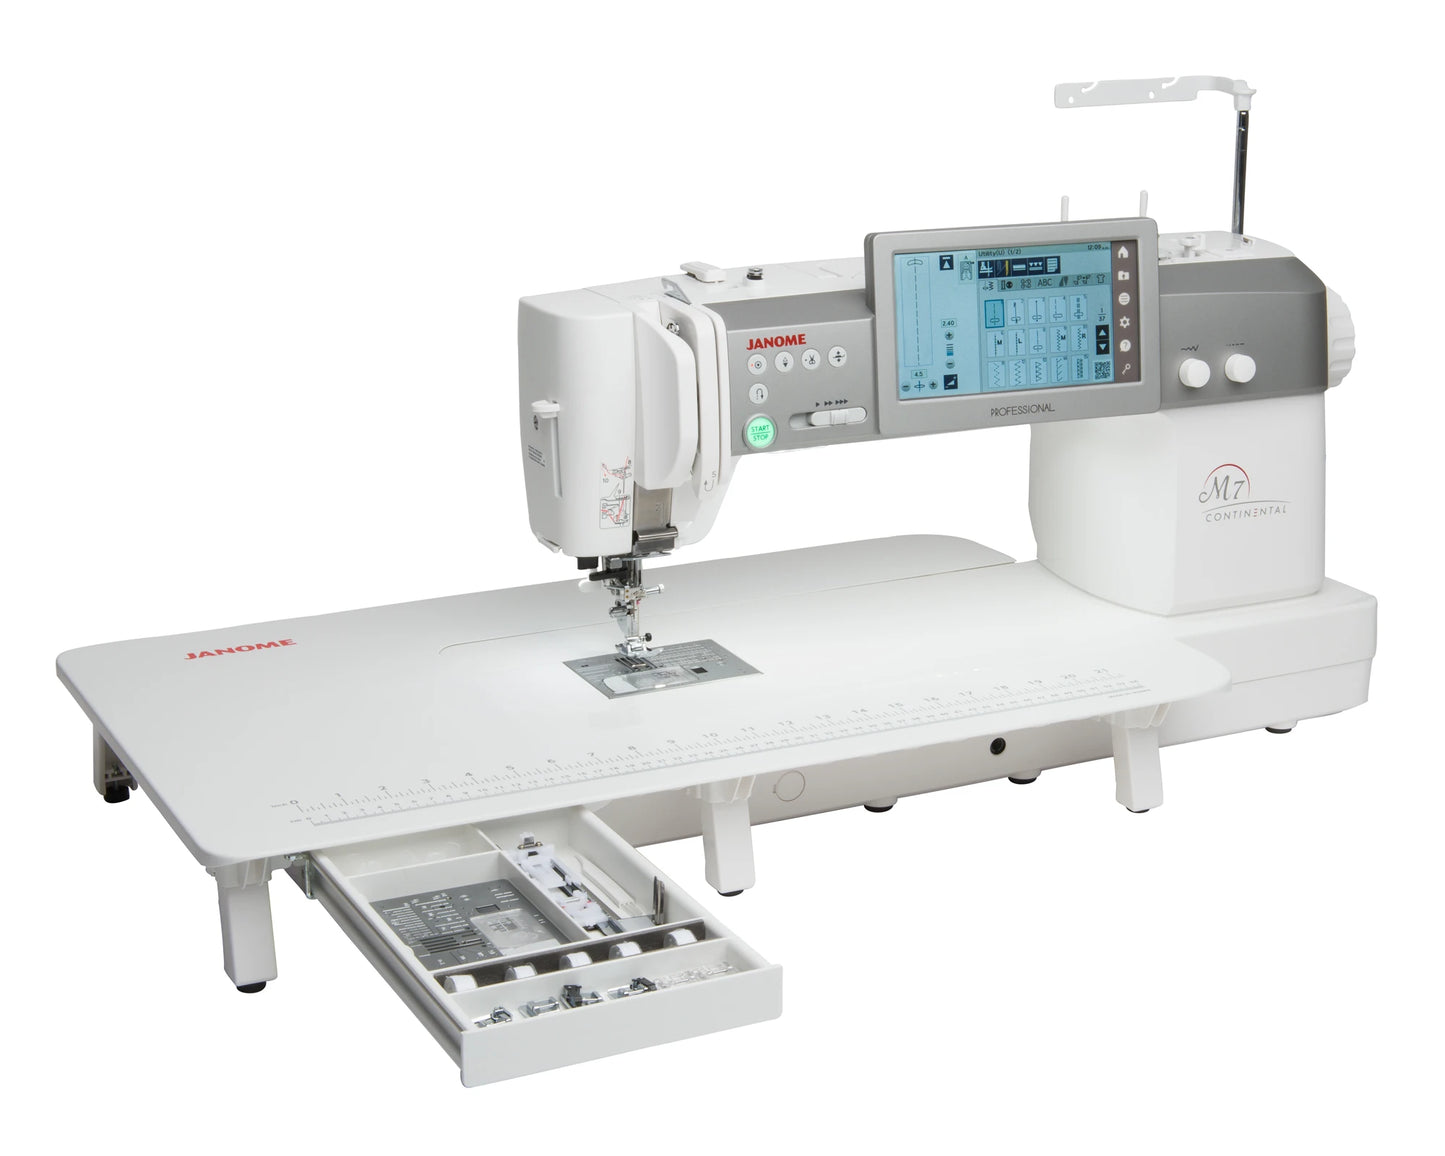 The Janome Continental M7 Professional